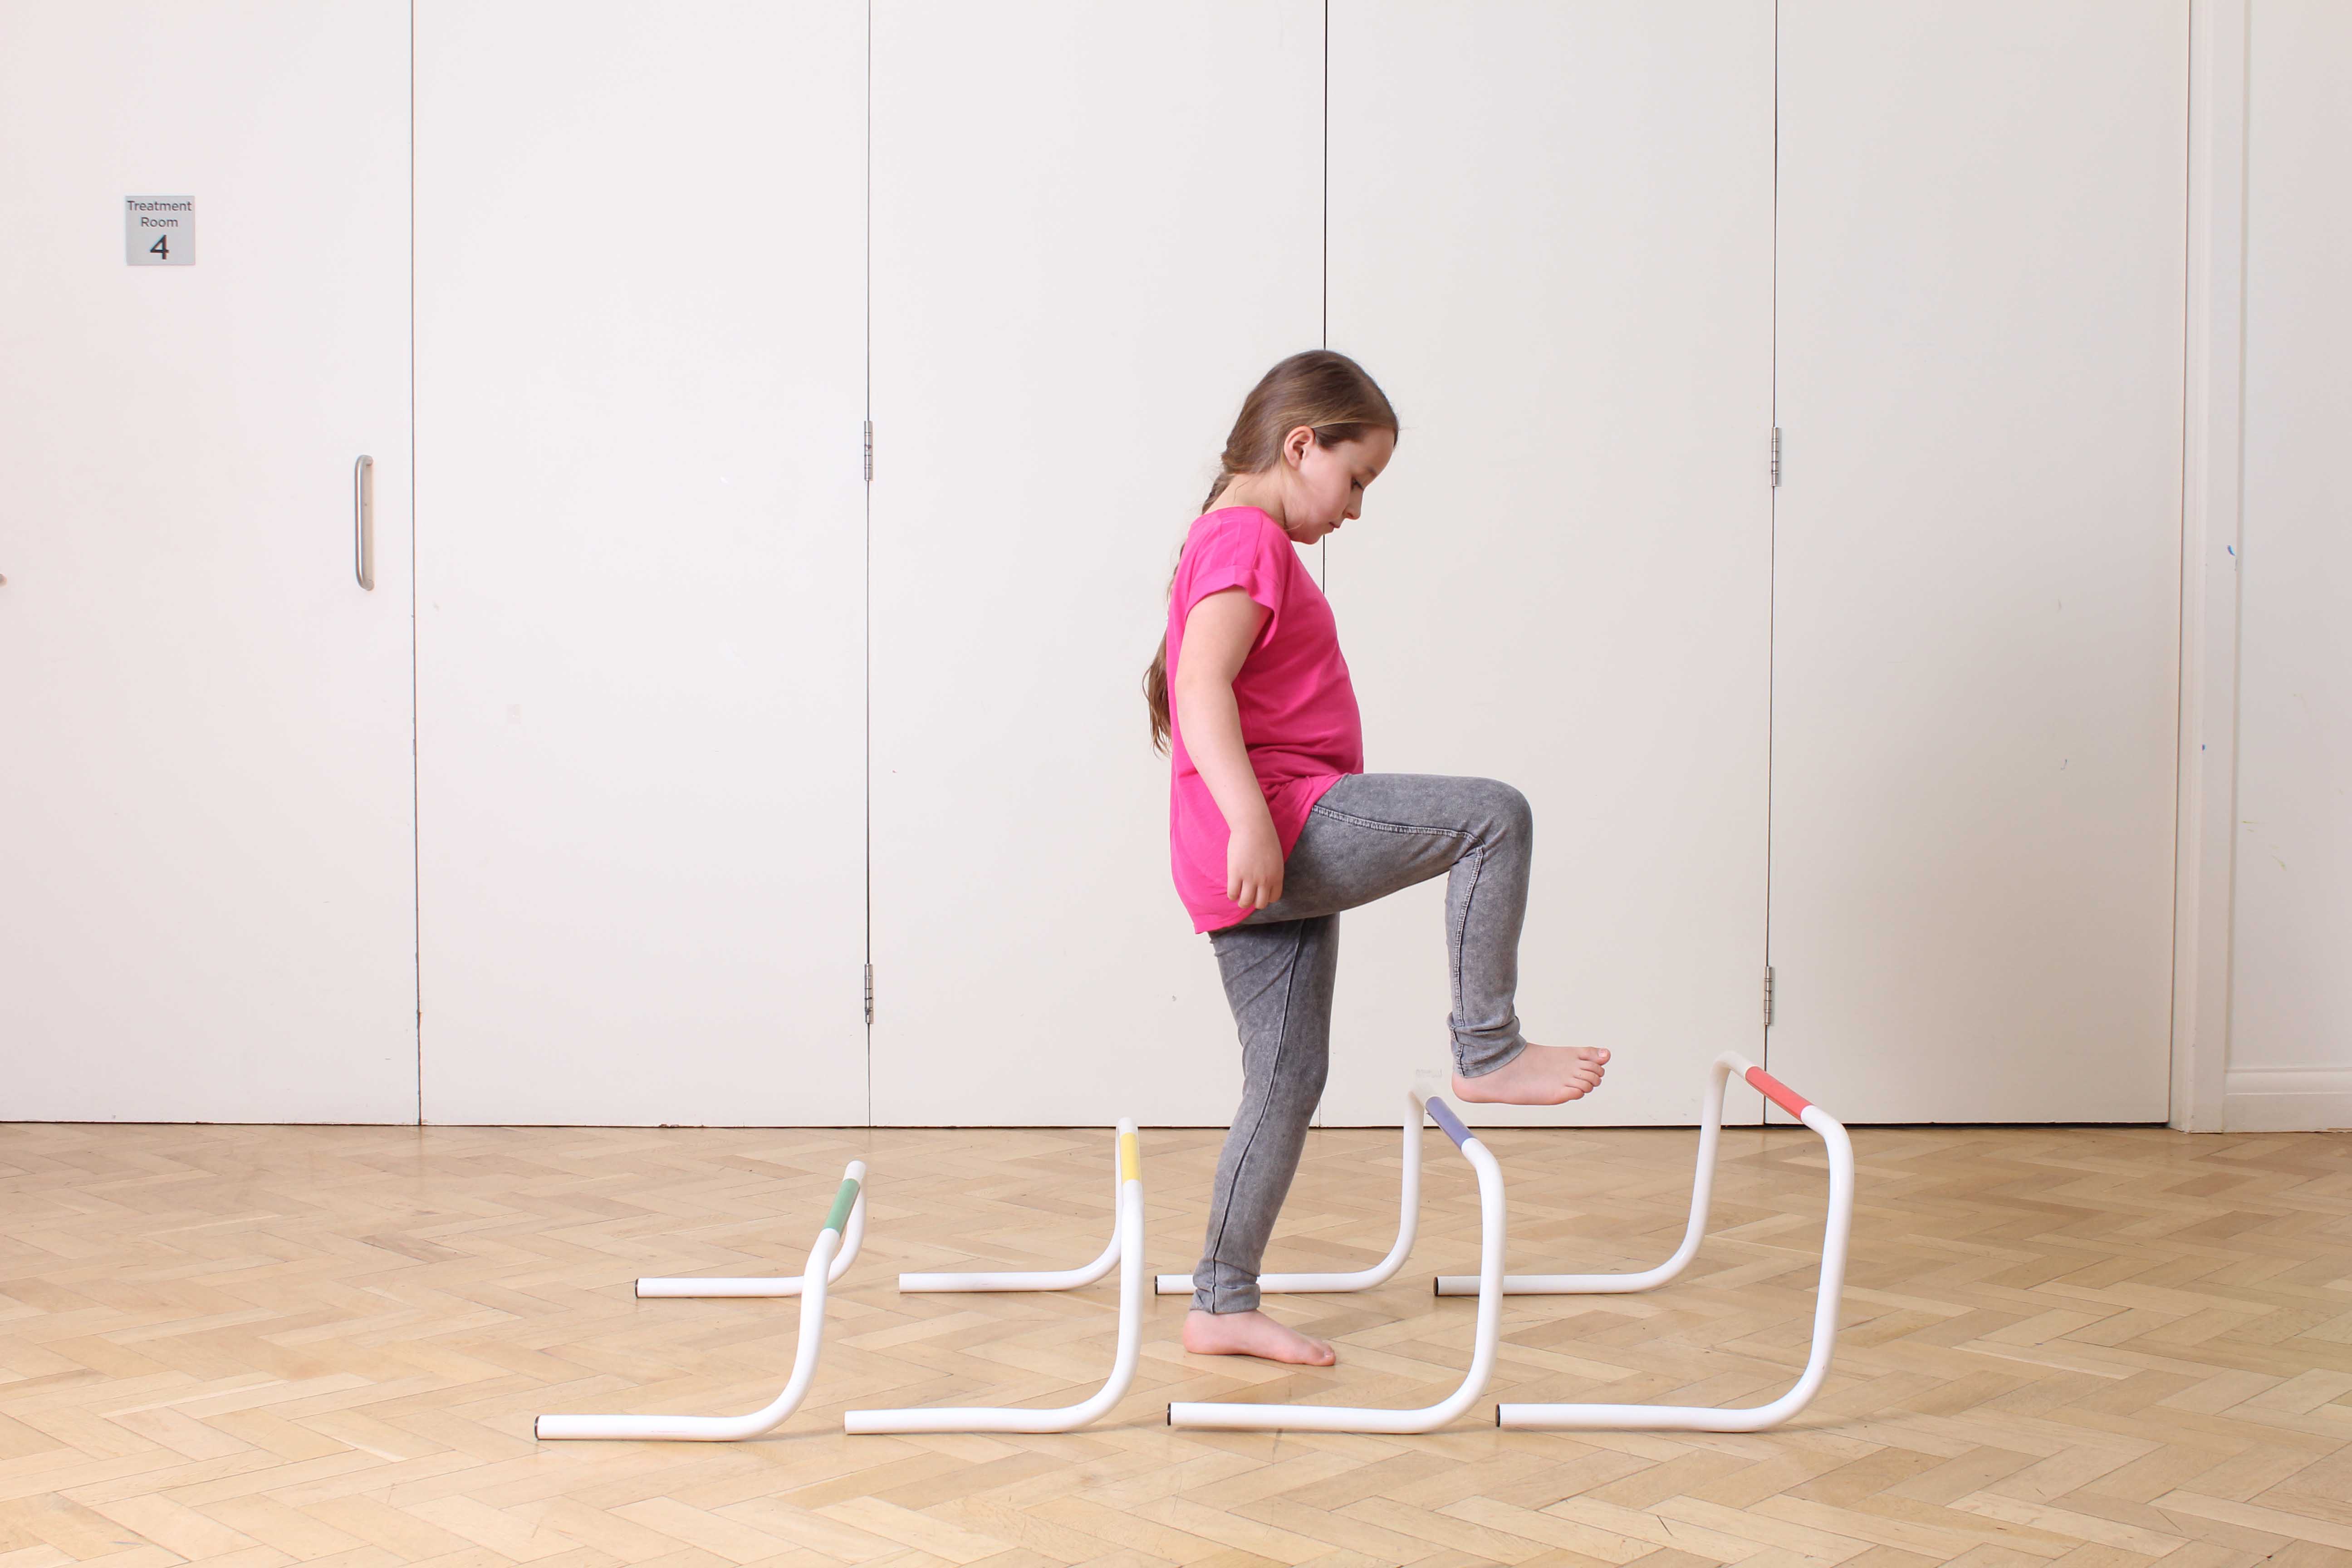 Gait re-education exercises between the parallel bars supervised by a paediatric physiotherapist